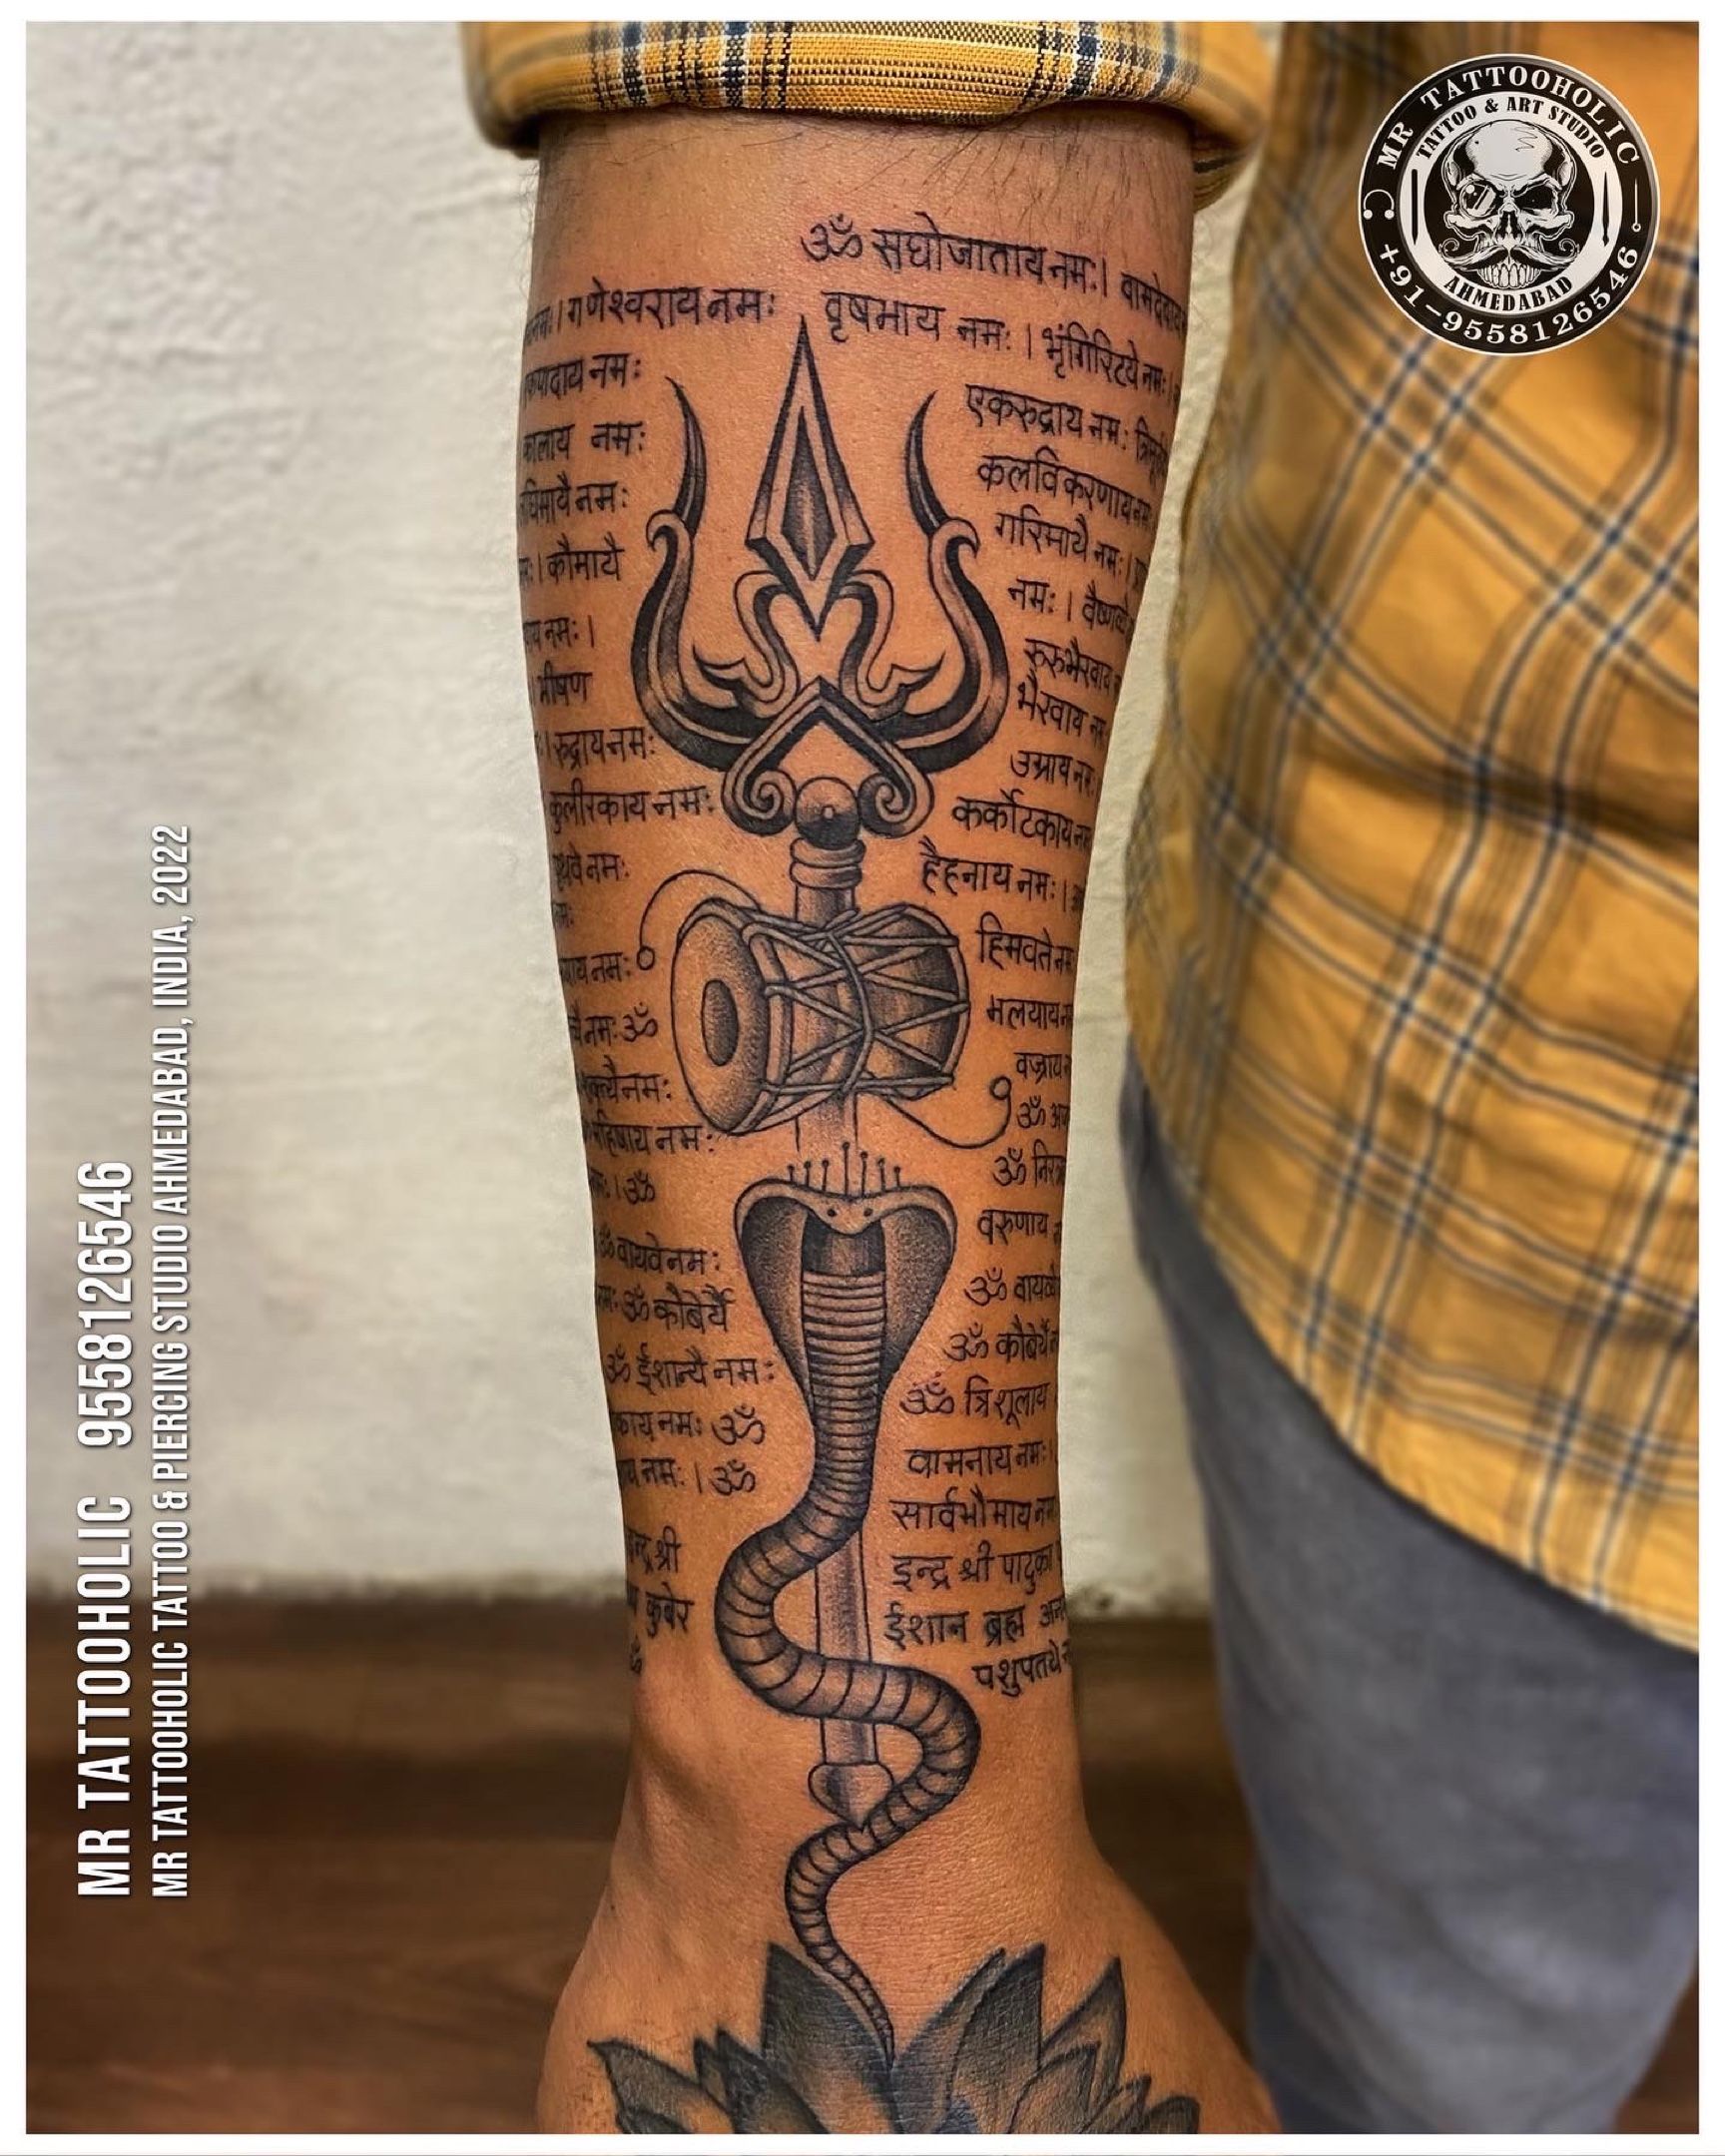 Lines N Shades Tattoo Studio - In Hindu origin, the word 'OM' represents a  chant and mantra! And we love how this tattoo is a perfect example of- “The  symbol OM represents